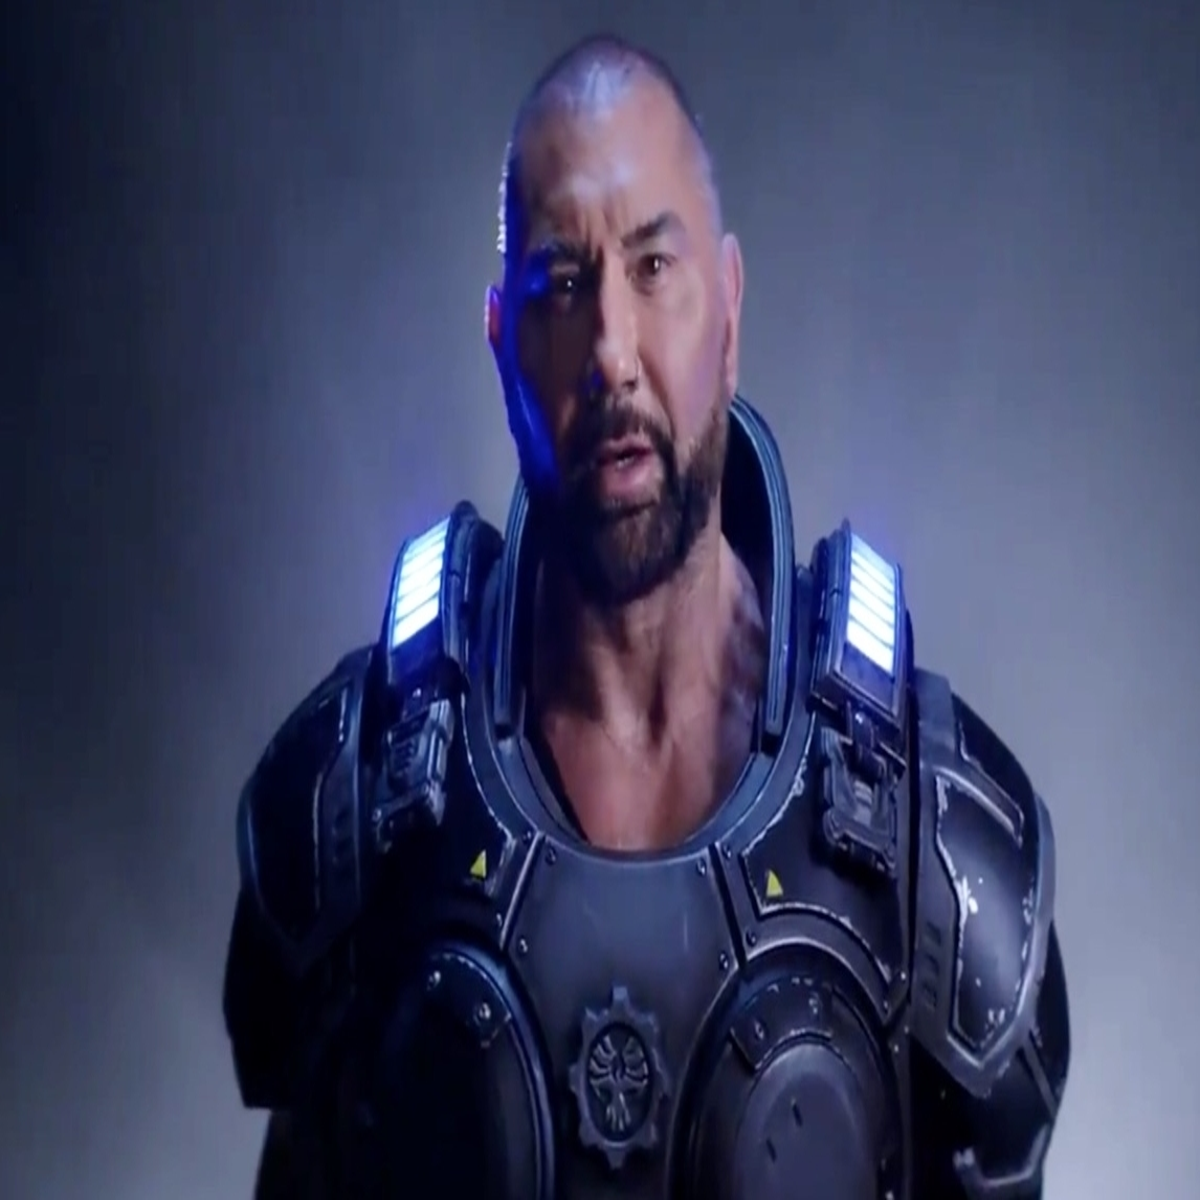 Gears 5' Xbox Series X update brings Dave Bautista to the story mode